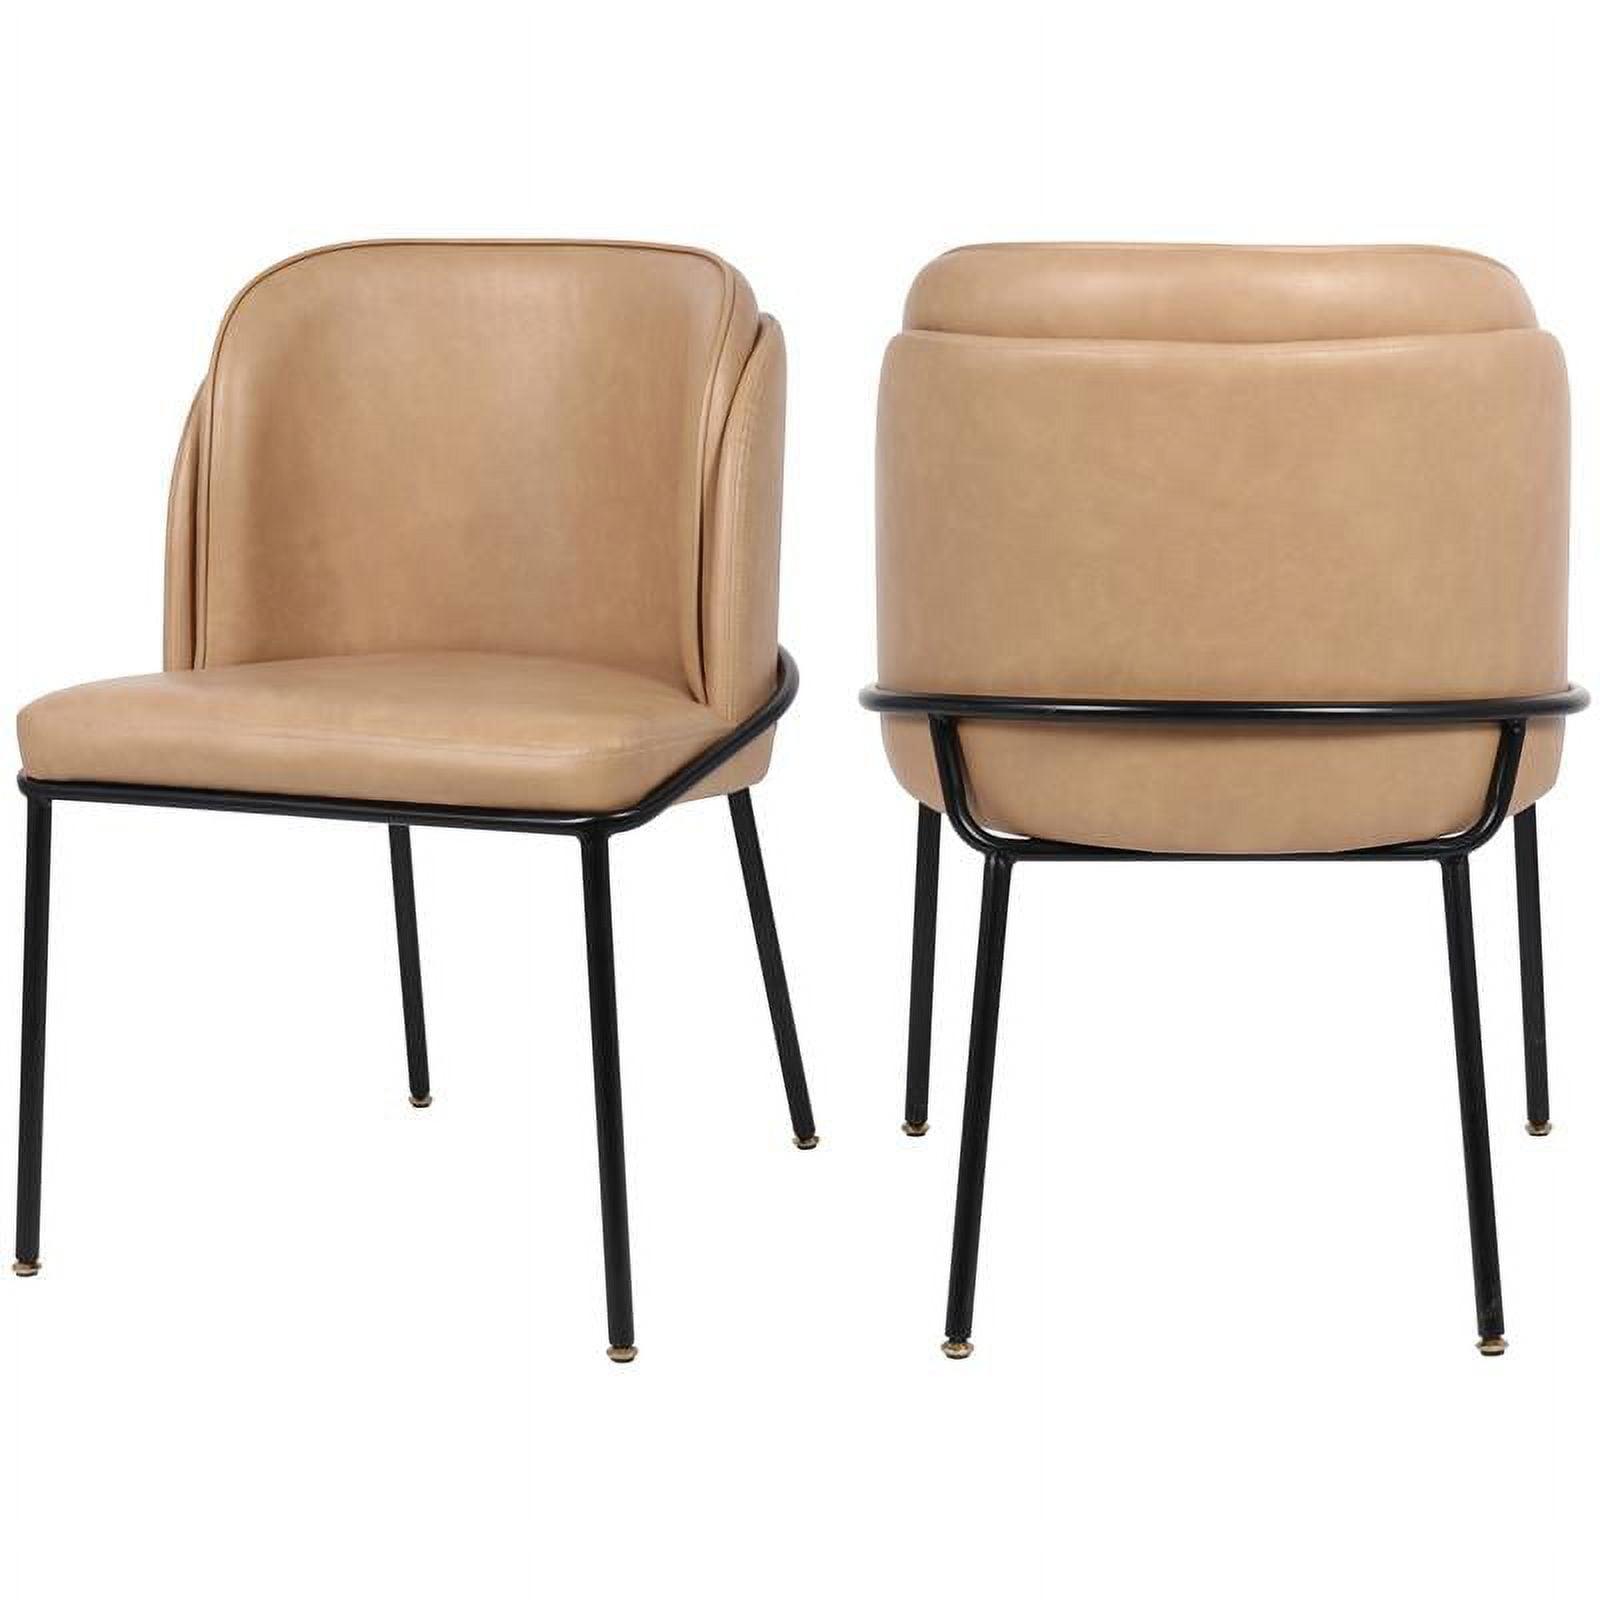 Soft Tan Vegan Leather and Matte Black Metal Dining Chair